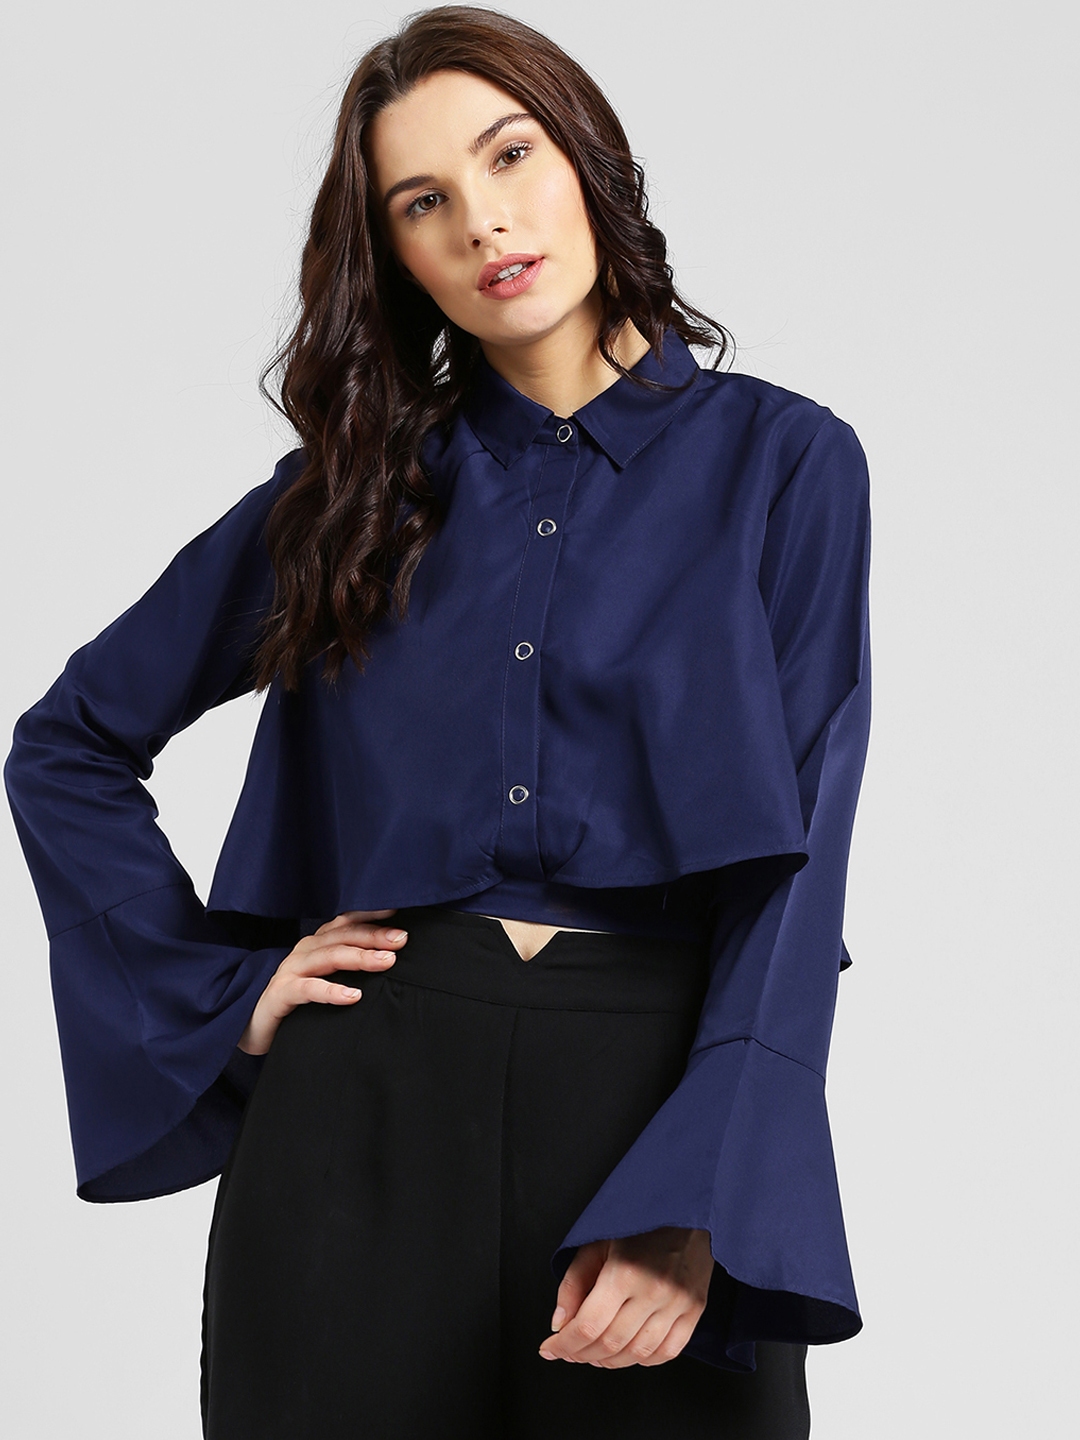 navy blue formal shirt for ladies